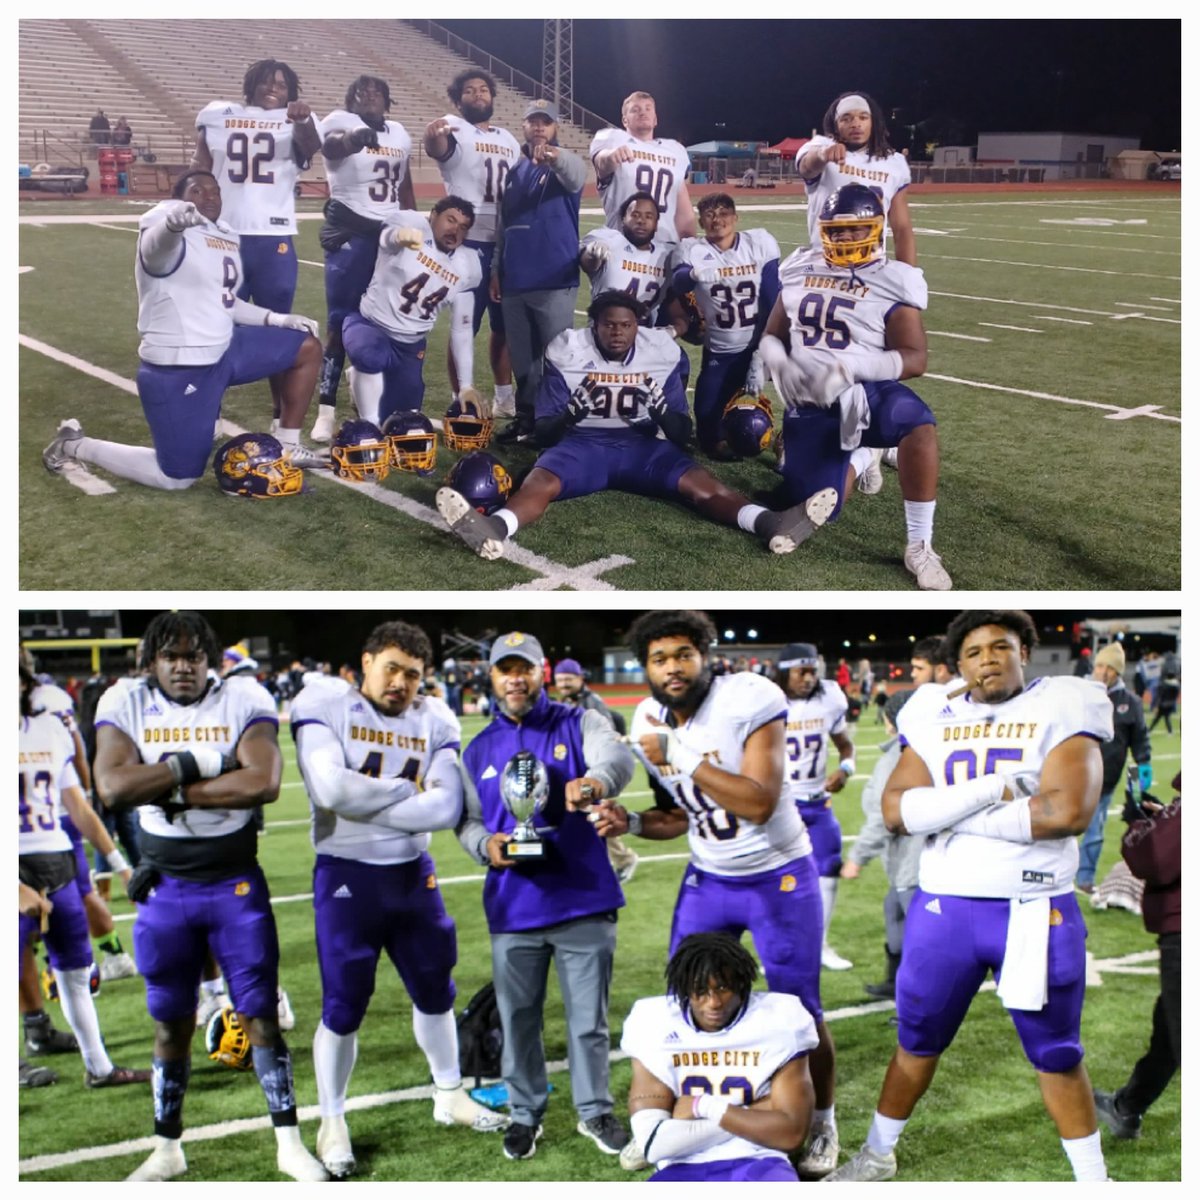 I'm So Proud of My Gladiators. They opened alot of eyes this Year. Special Group and I Enjoyed Developing and Coaching these Young Men! #Gladiators #QuickReaction#QuickDecisions#Dominate #YouNeedYou